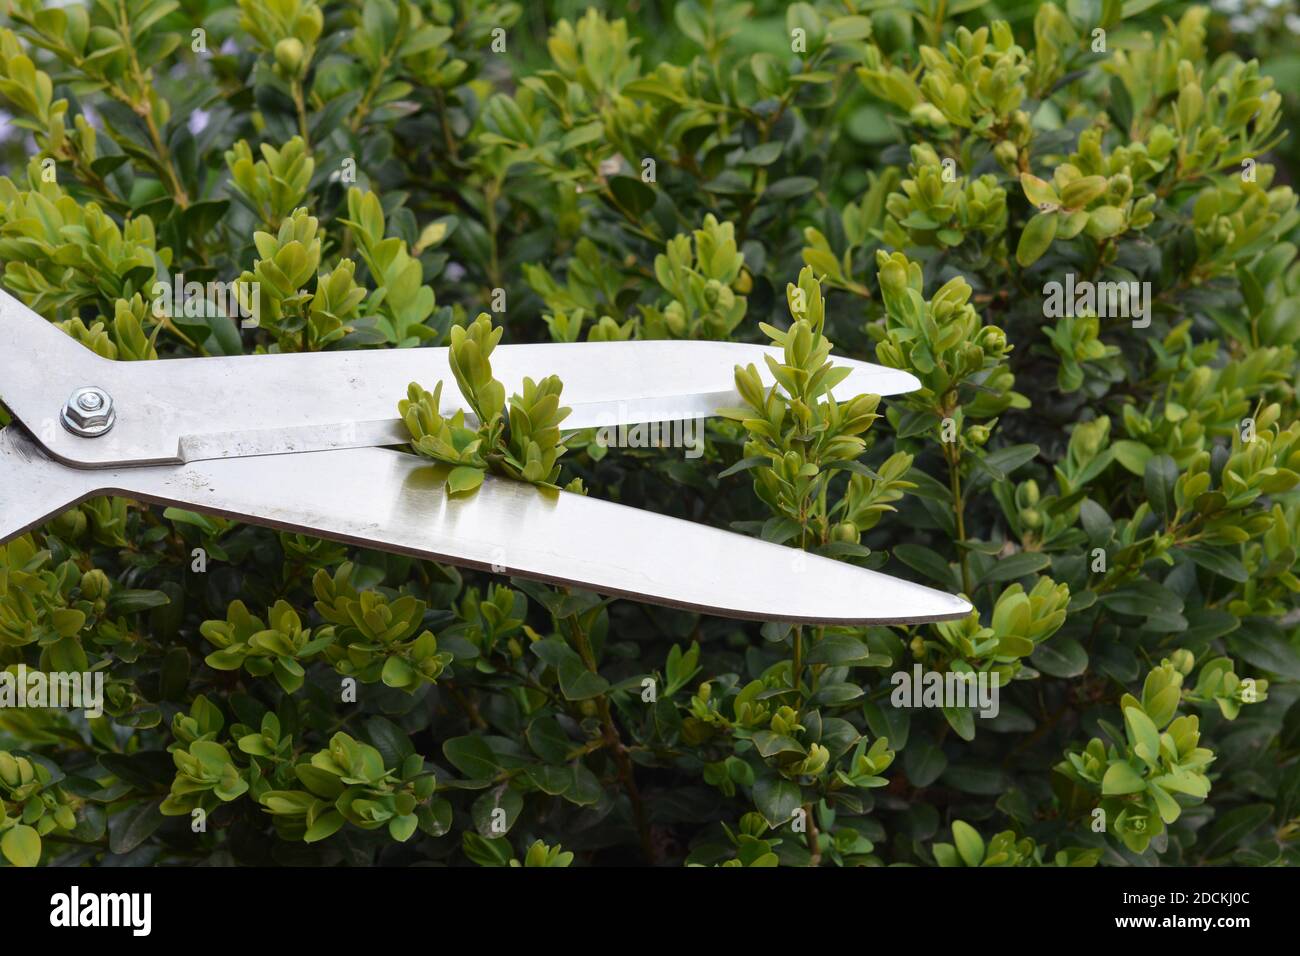 A close-up on trimming, cutting, pruning evergreen boxwood, buxus shrub using hedge shears to create topiary shapes and design hedges. Stock Photo